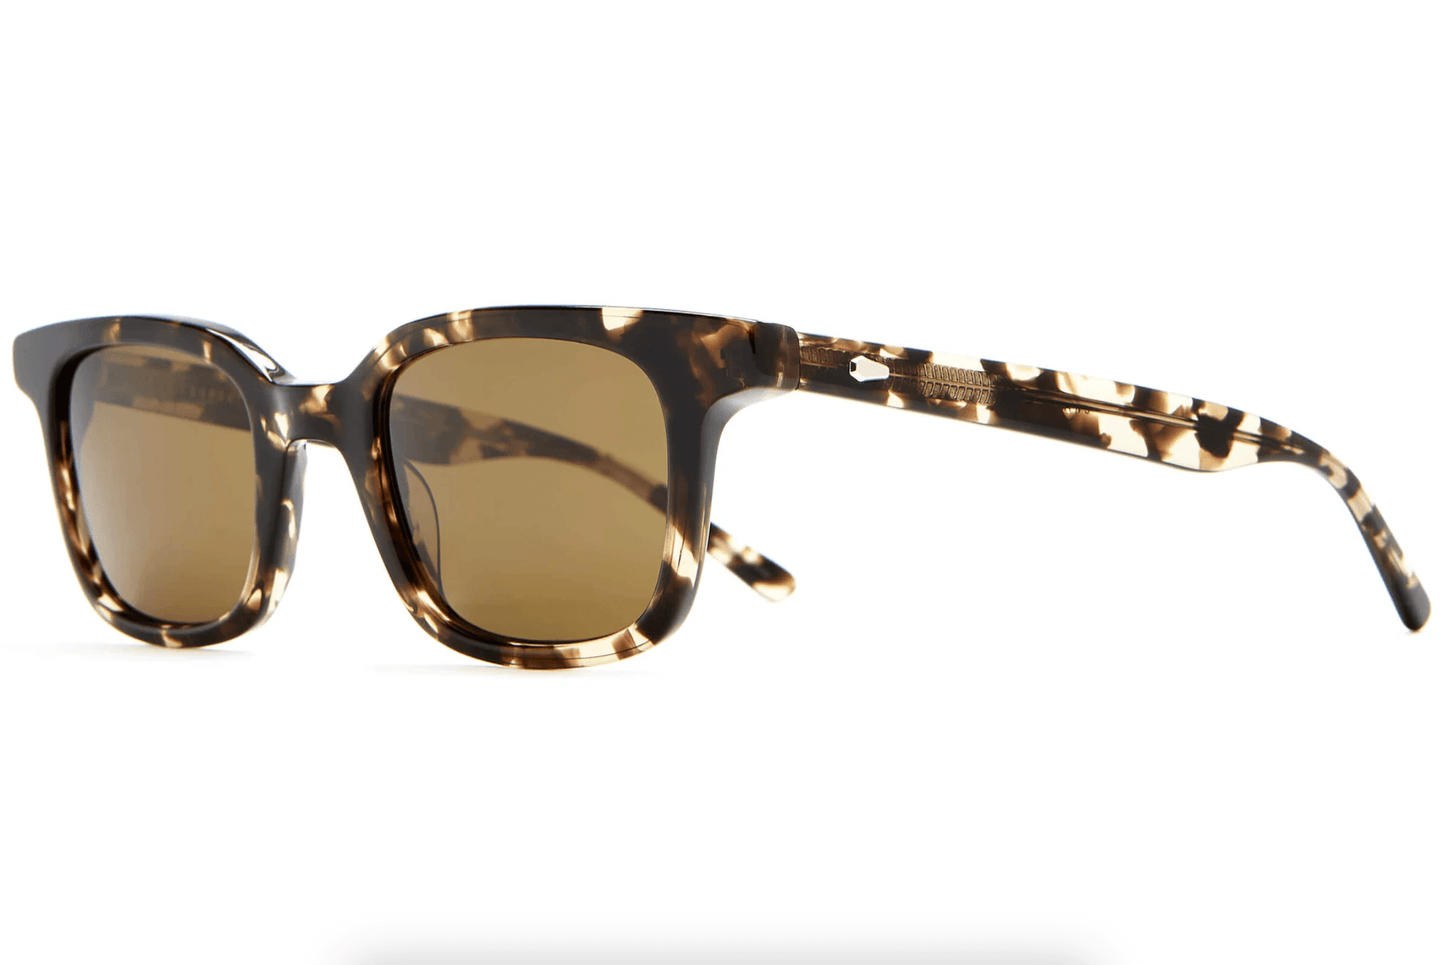 The Dropout Boogie Sunglasses by Crap Eyewear - Haven